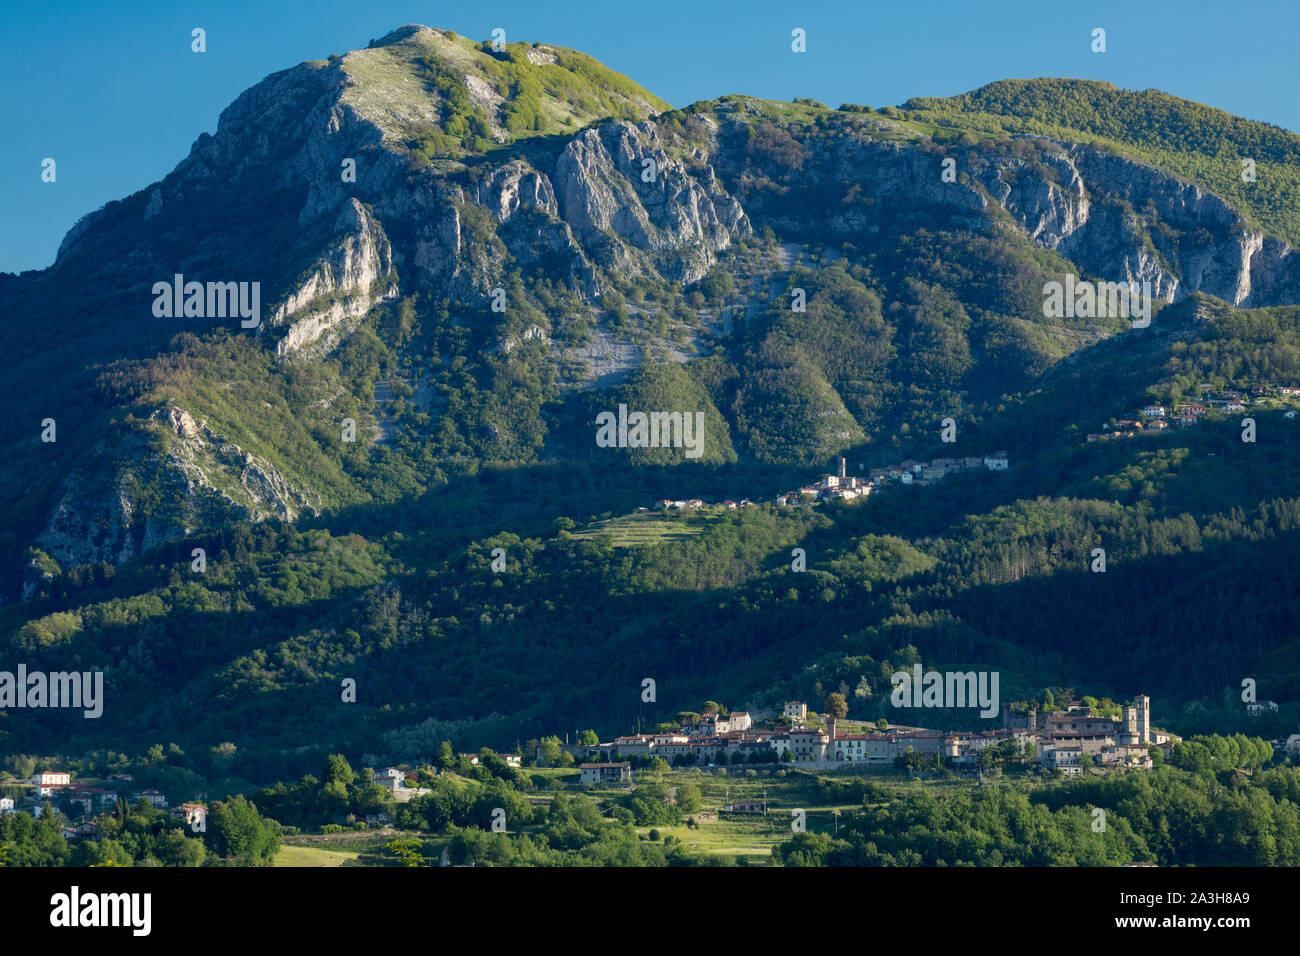 First light on the Pania di Corfino with the villages of Saaprosso & Castiglione di Garfagnana, Apennine Mountains, Tuscany, Italy Stock Photo